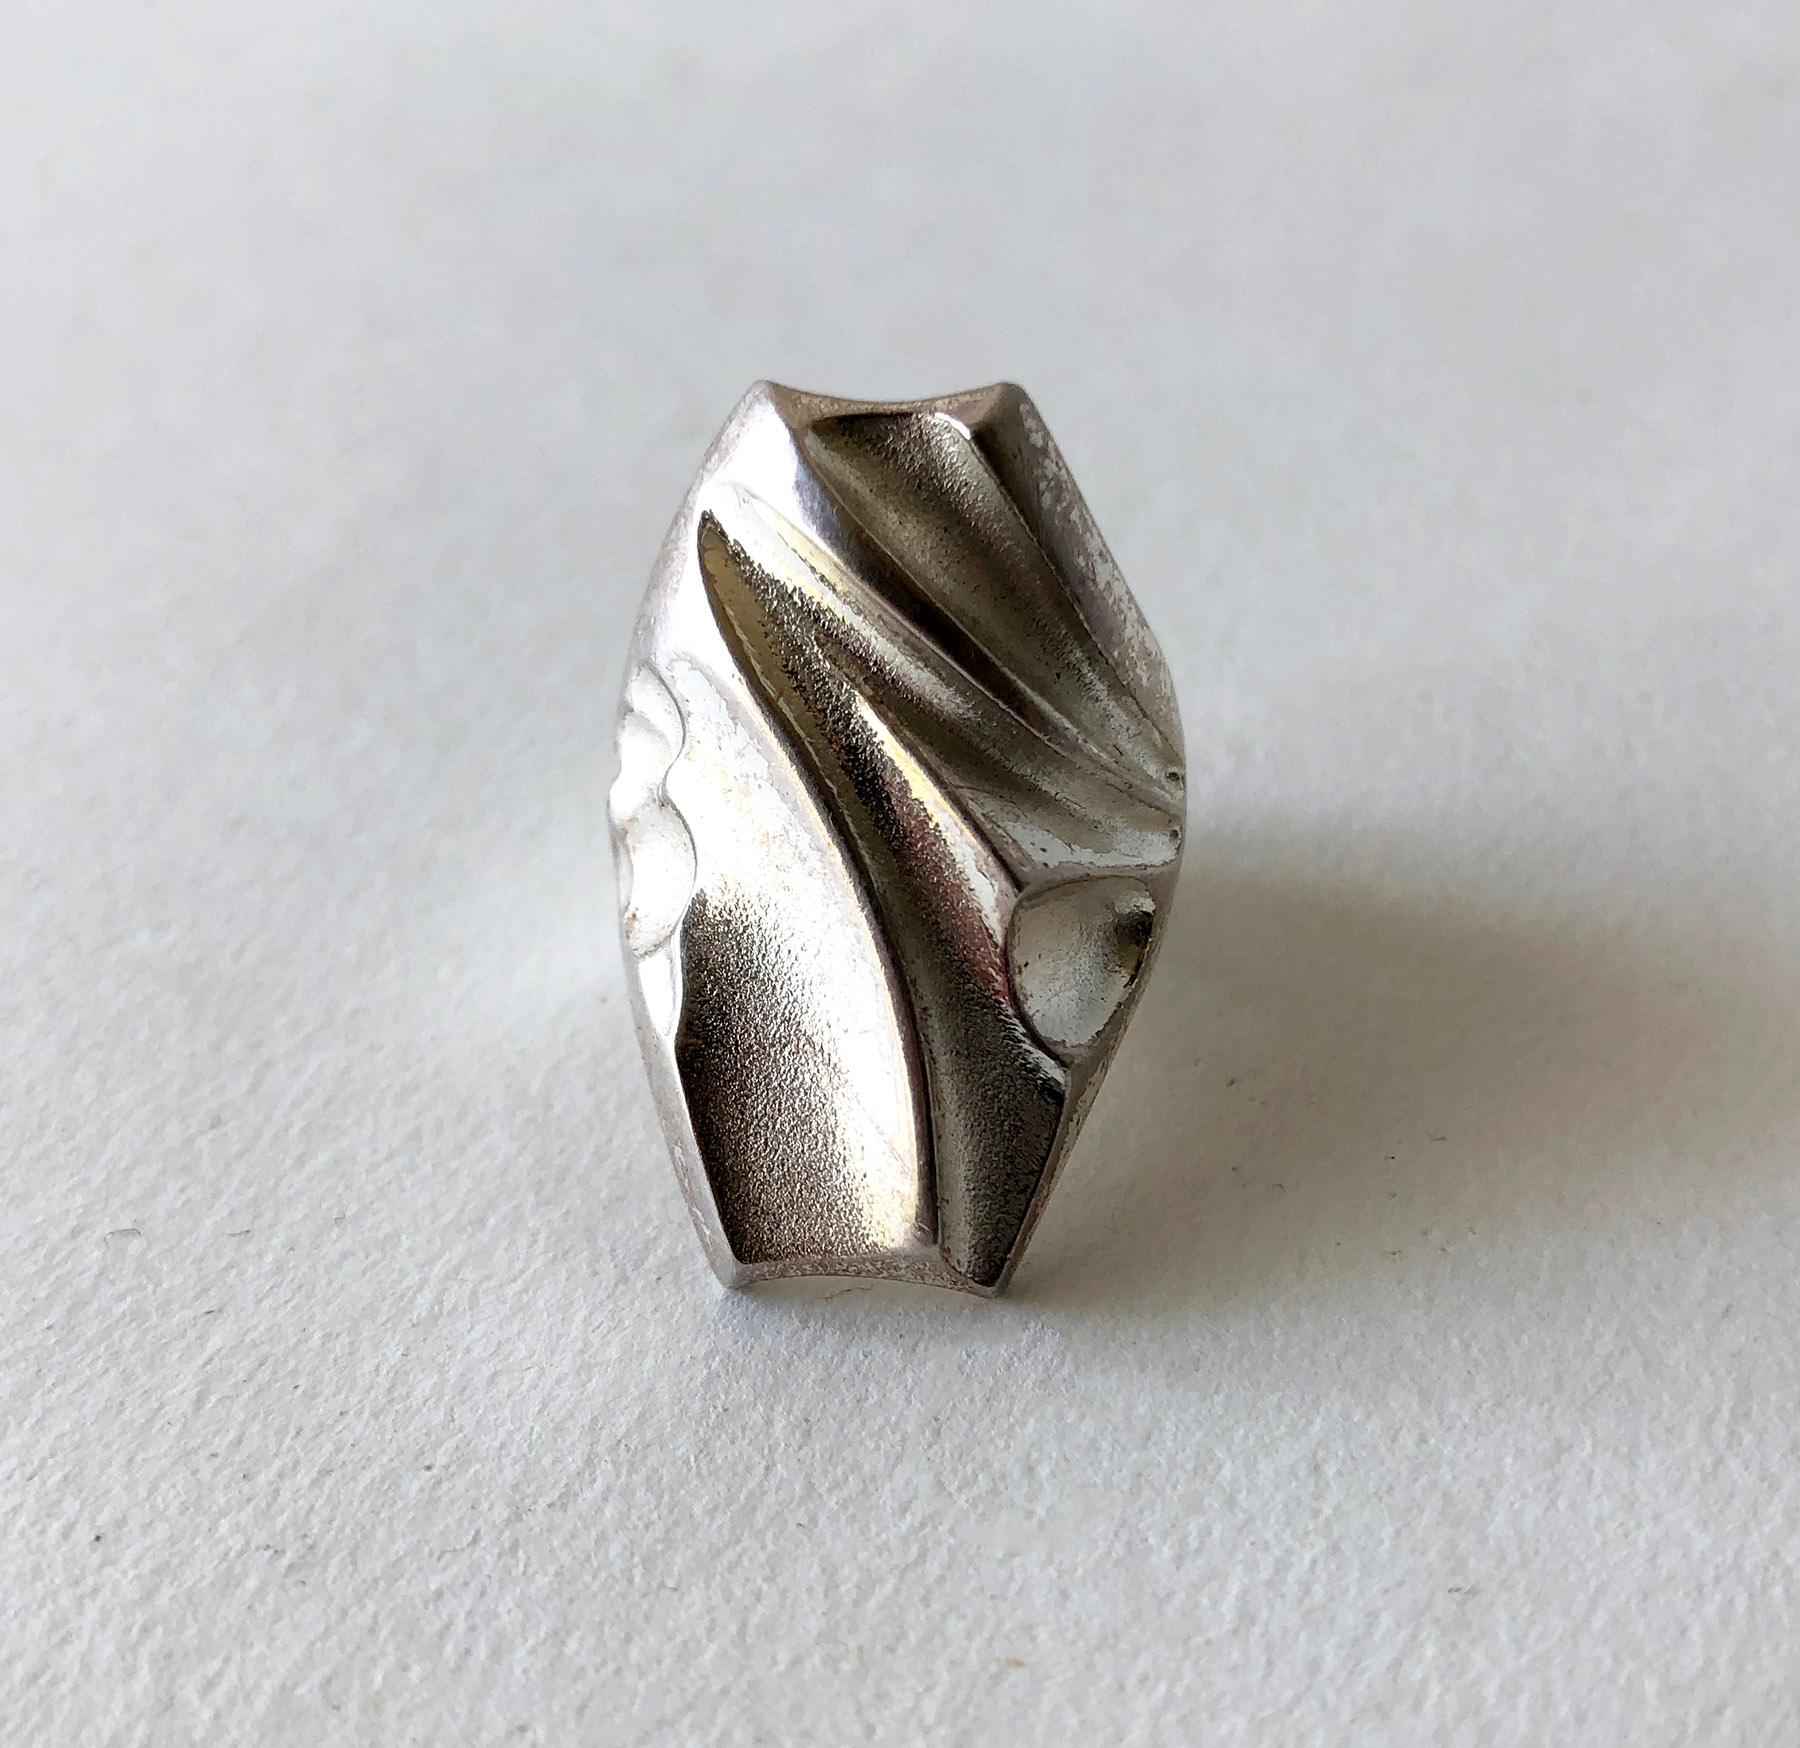 Sterling silver ring created by master sculptor and jeweler Bjorn Weckstrom of Finland.  Ring is a finger size 6.5 and is signed 925, X8 (1999), Lapponia.  In very good vintage condition.  